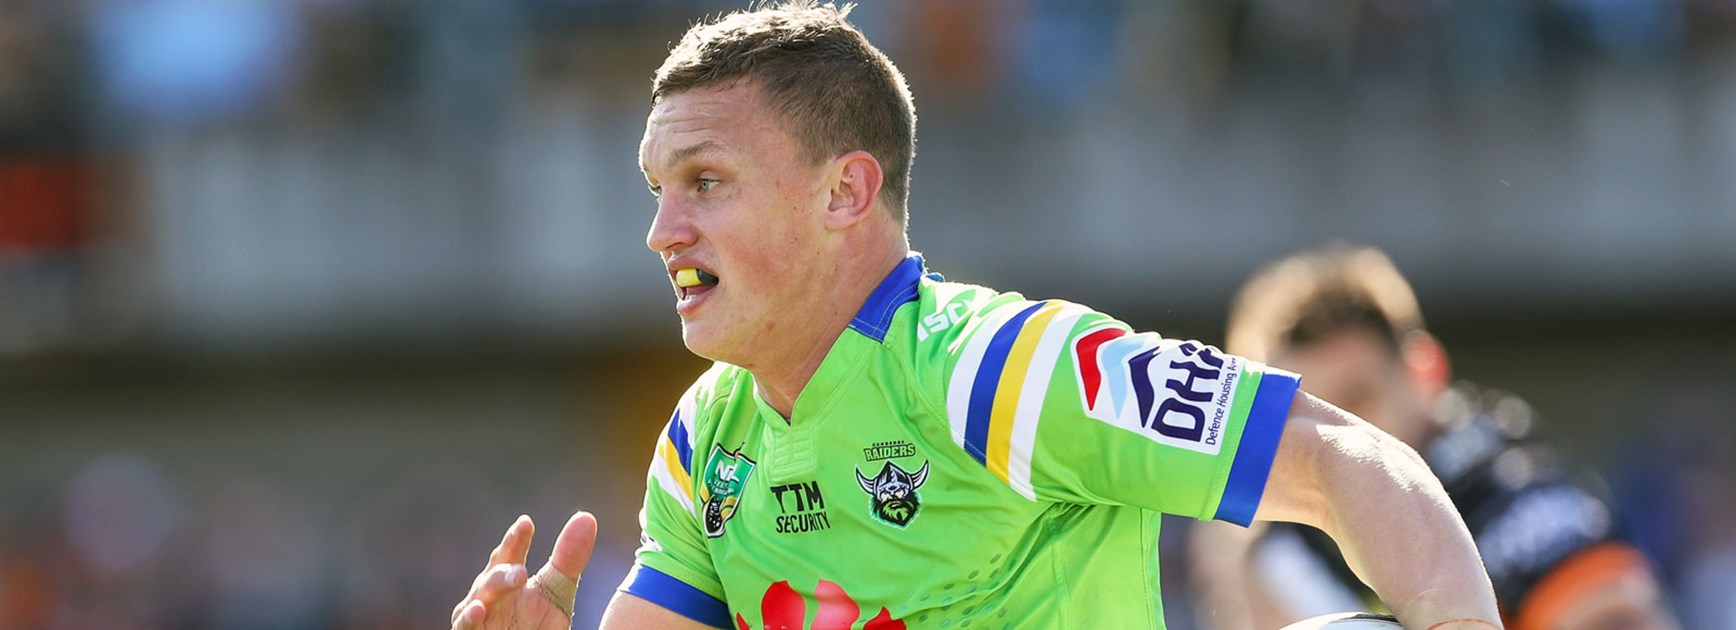 Raiders fullback Jack Whighton will plead not guilty to a grade two shoulder charge and will face the NRL judiciary.